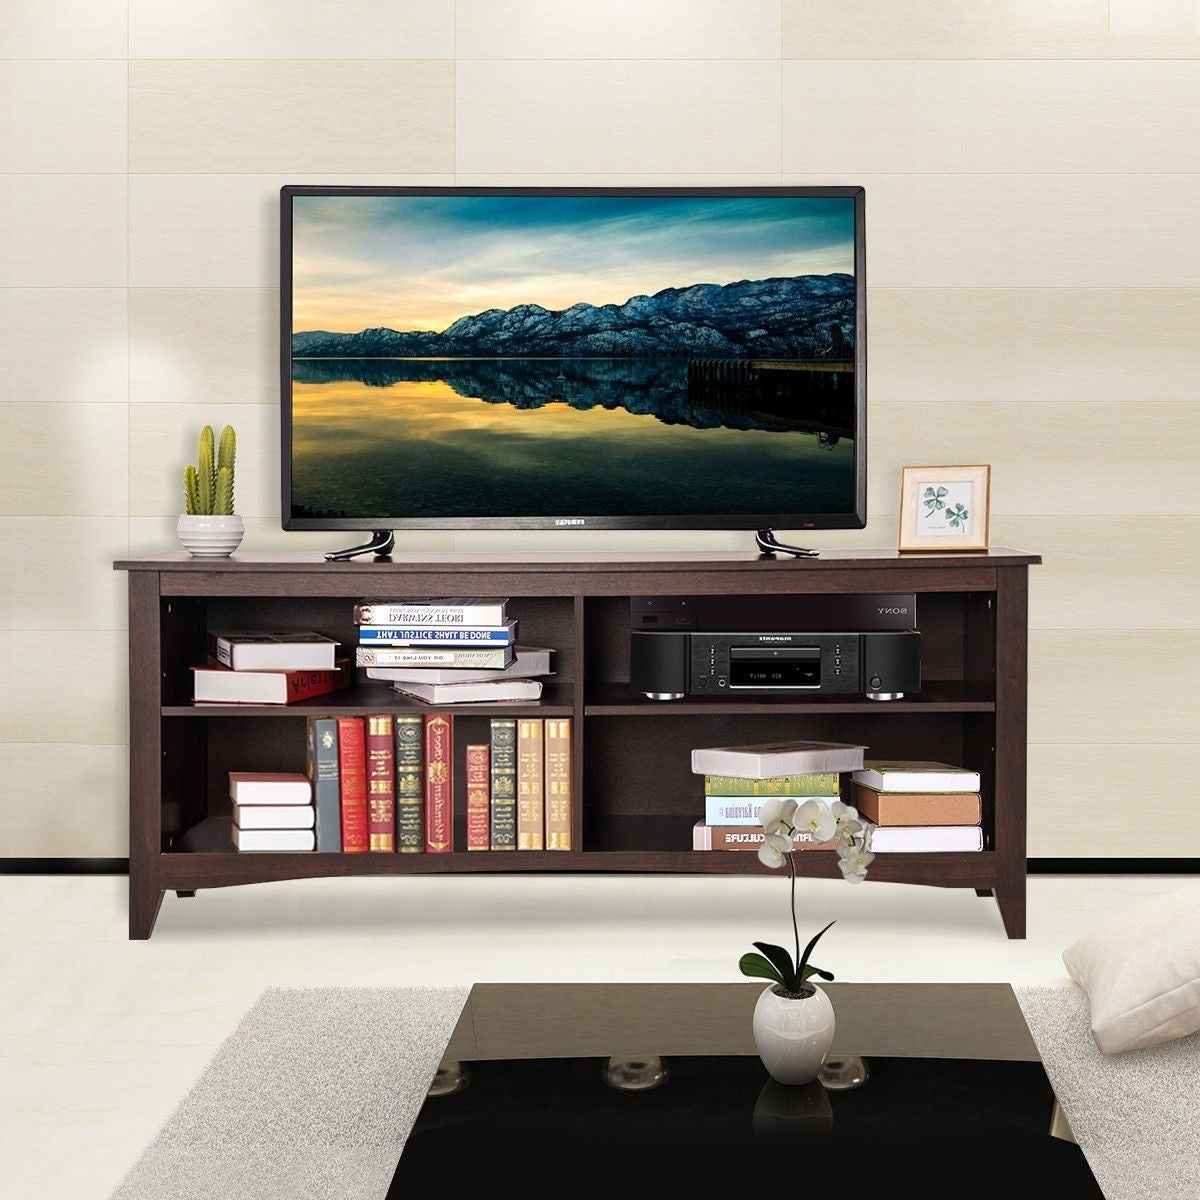 Living Room > TV Stands And Entertainment Centers - Contemporary TV Stand For Up To 60-inch TV In Espresso Finish